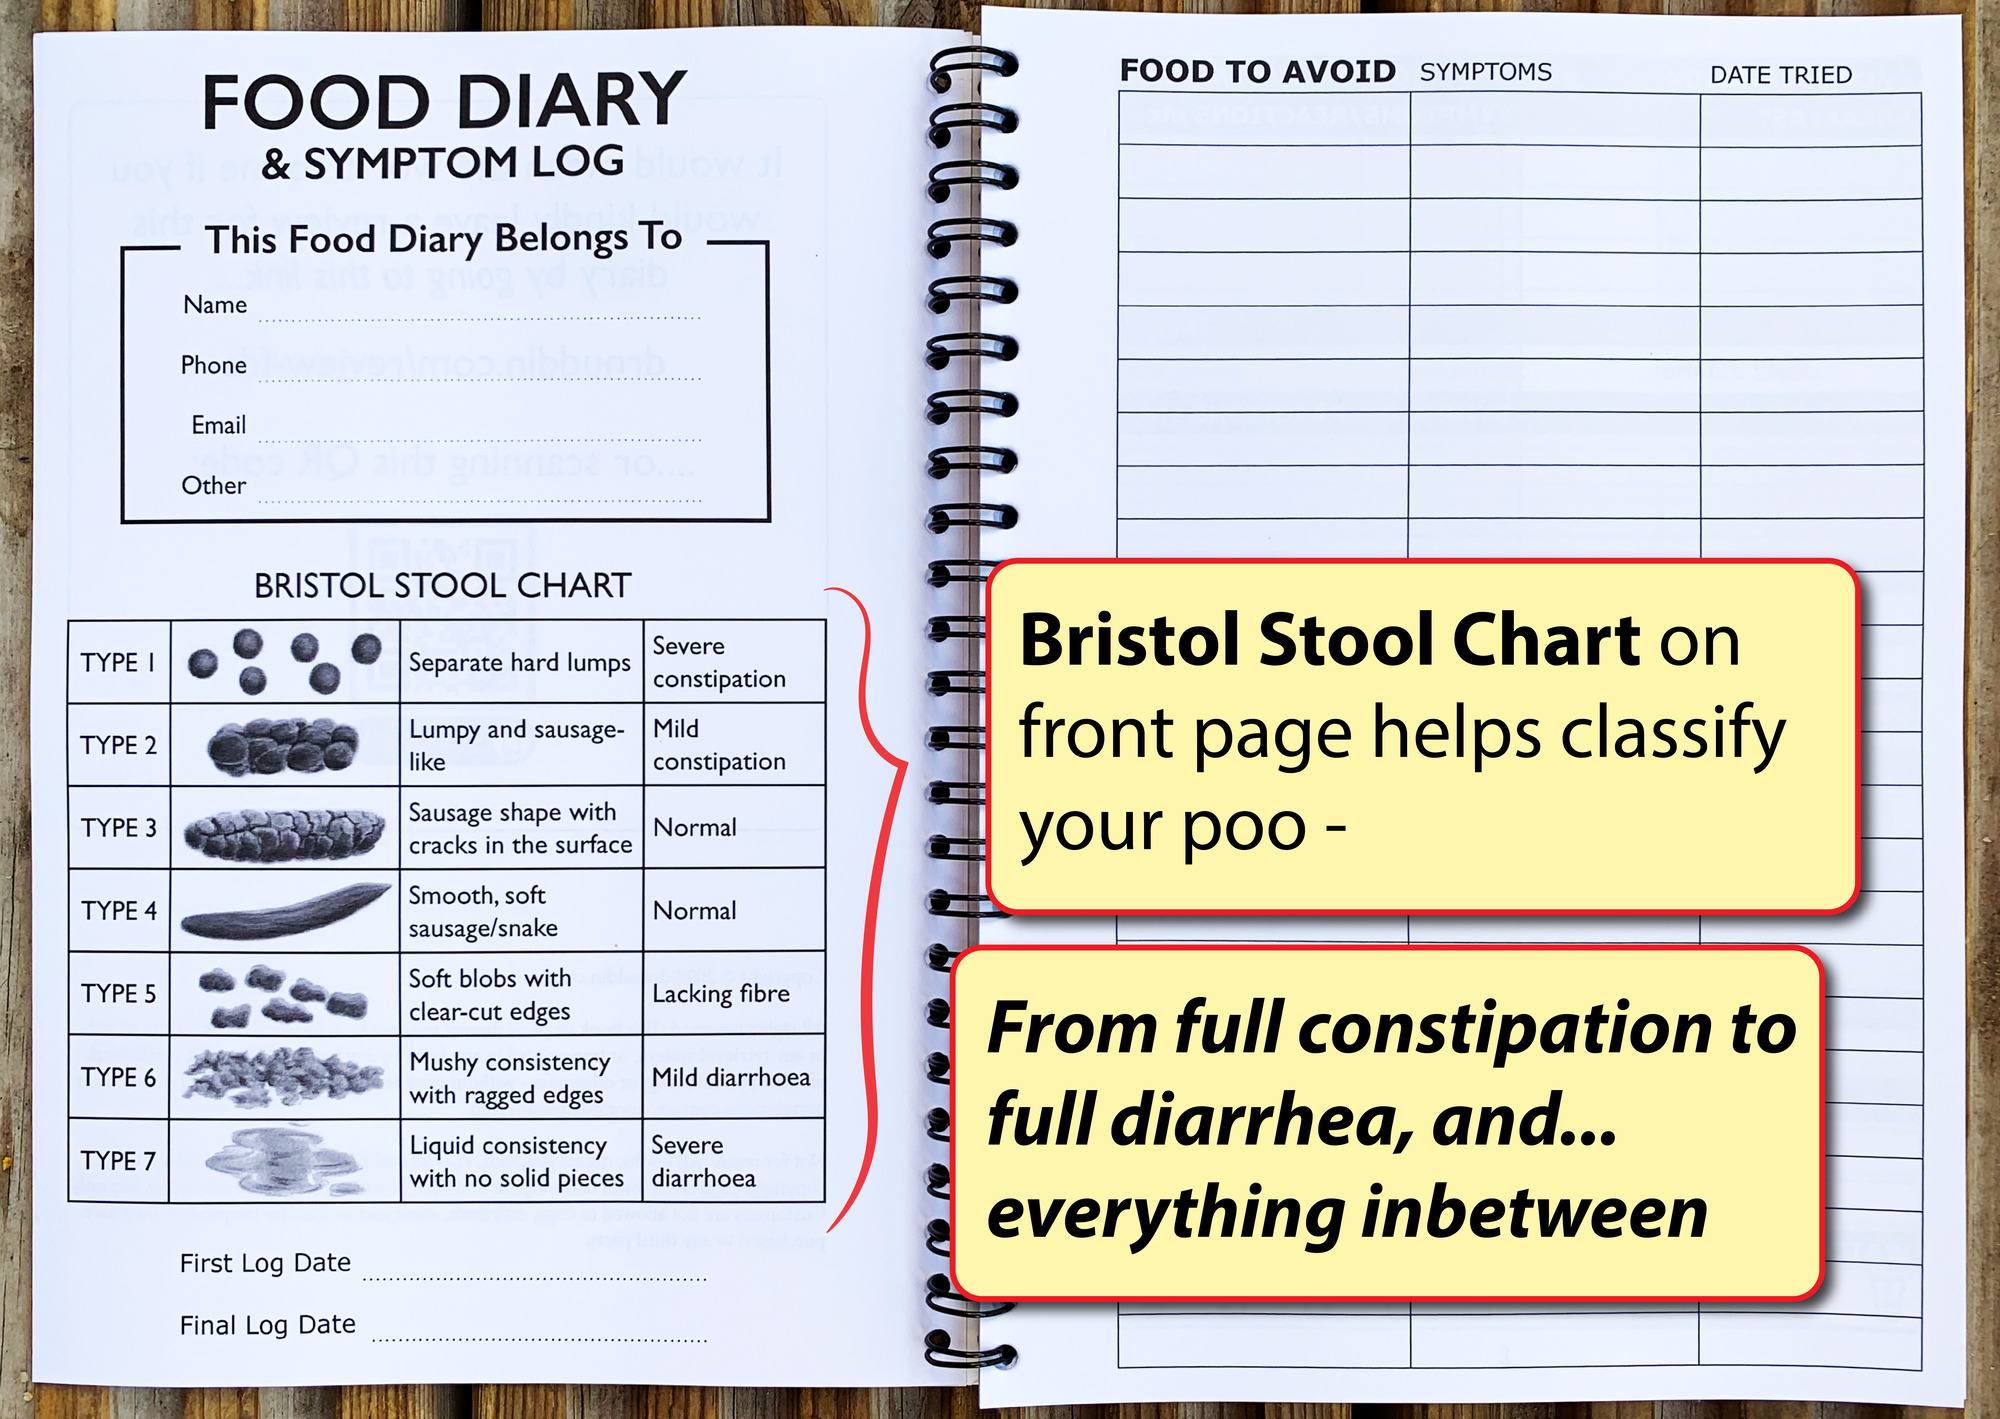 Diary of symptoms and bowel movements.